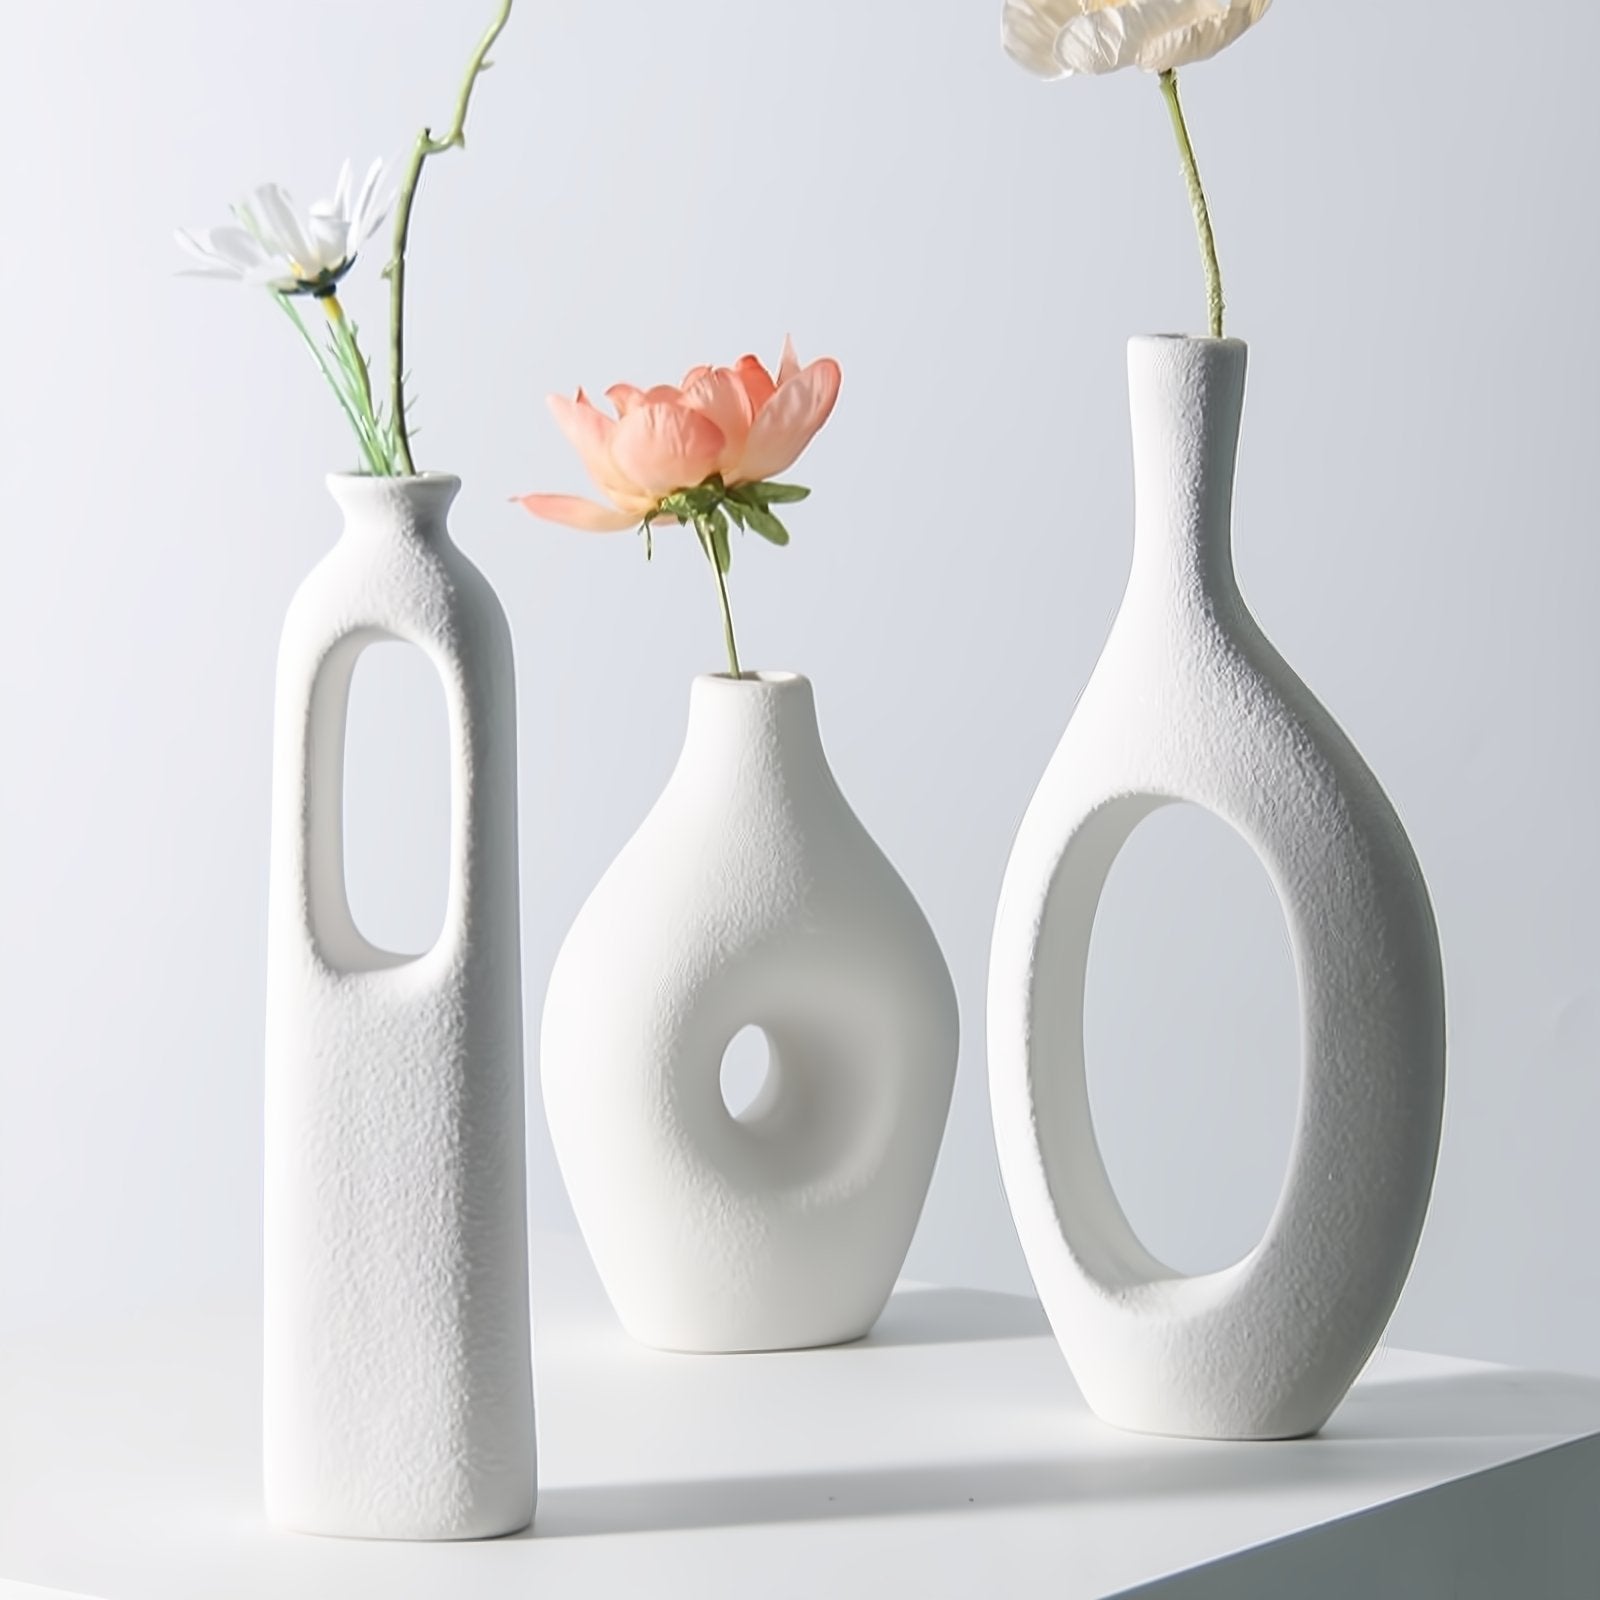 2x1 Nordic hollow Vase for Dried Flowers | - -